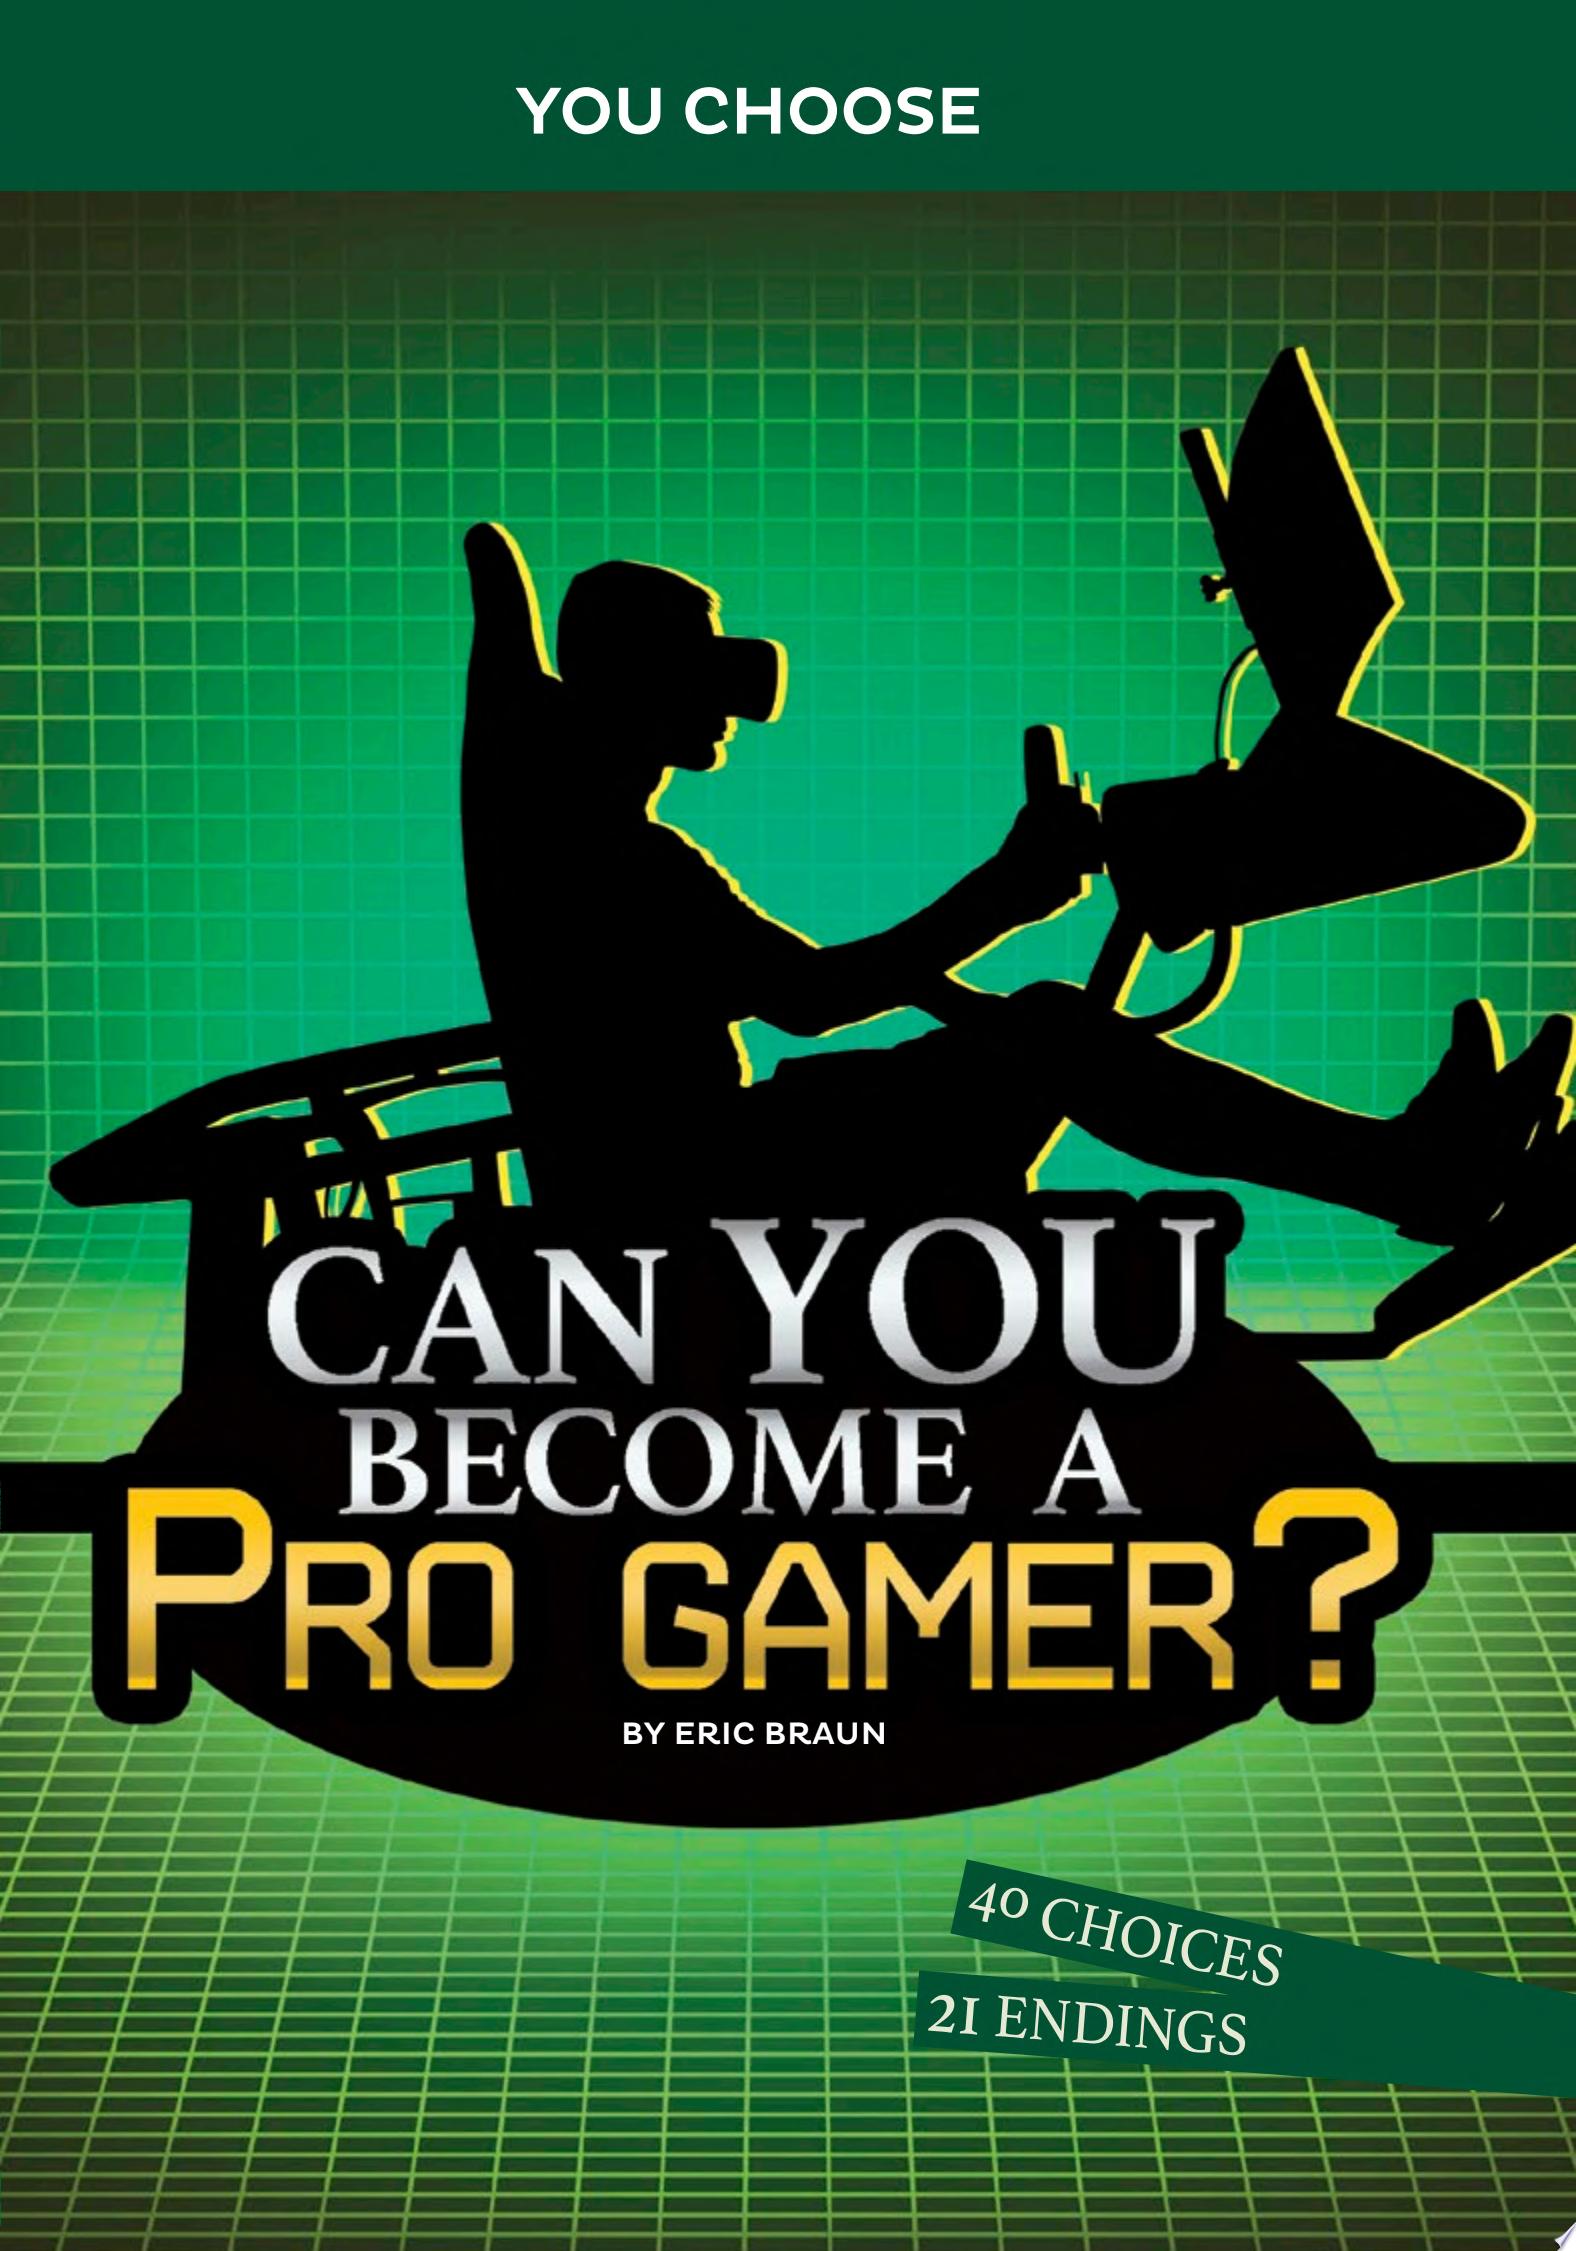 Image for "Can You Become a Pro Gamer?"